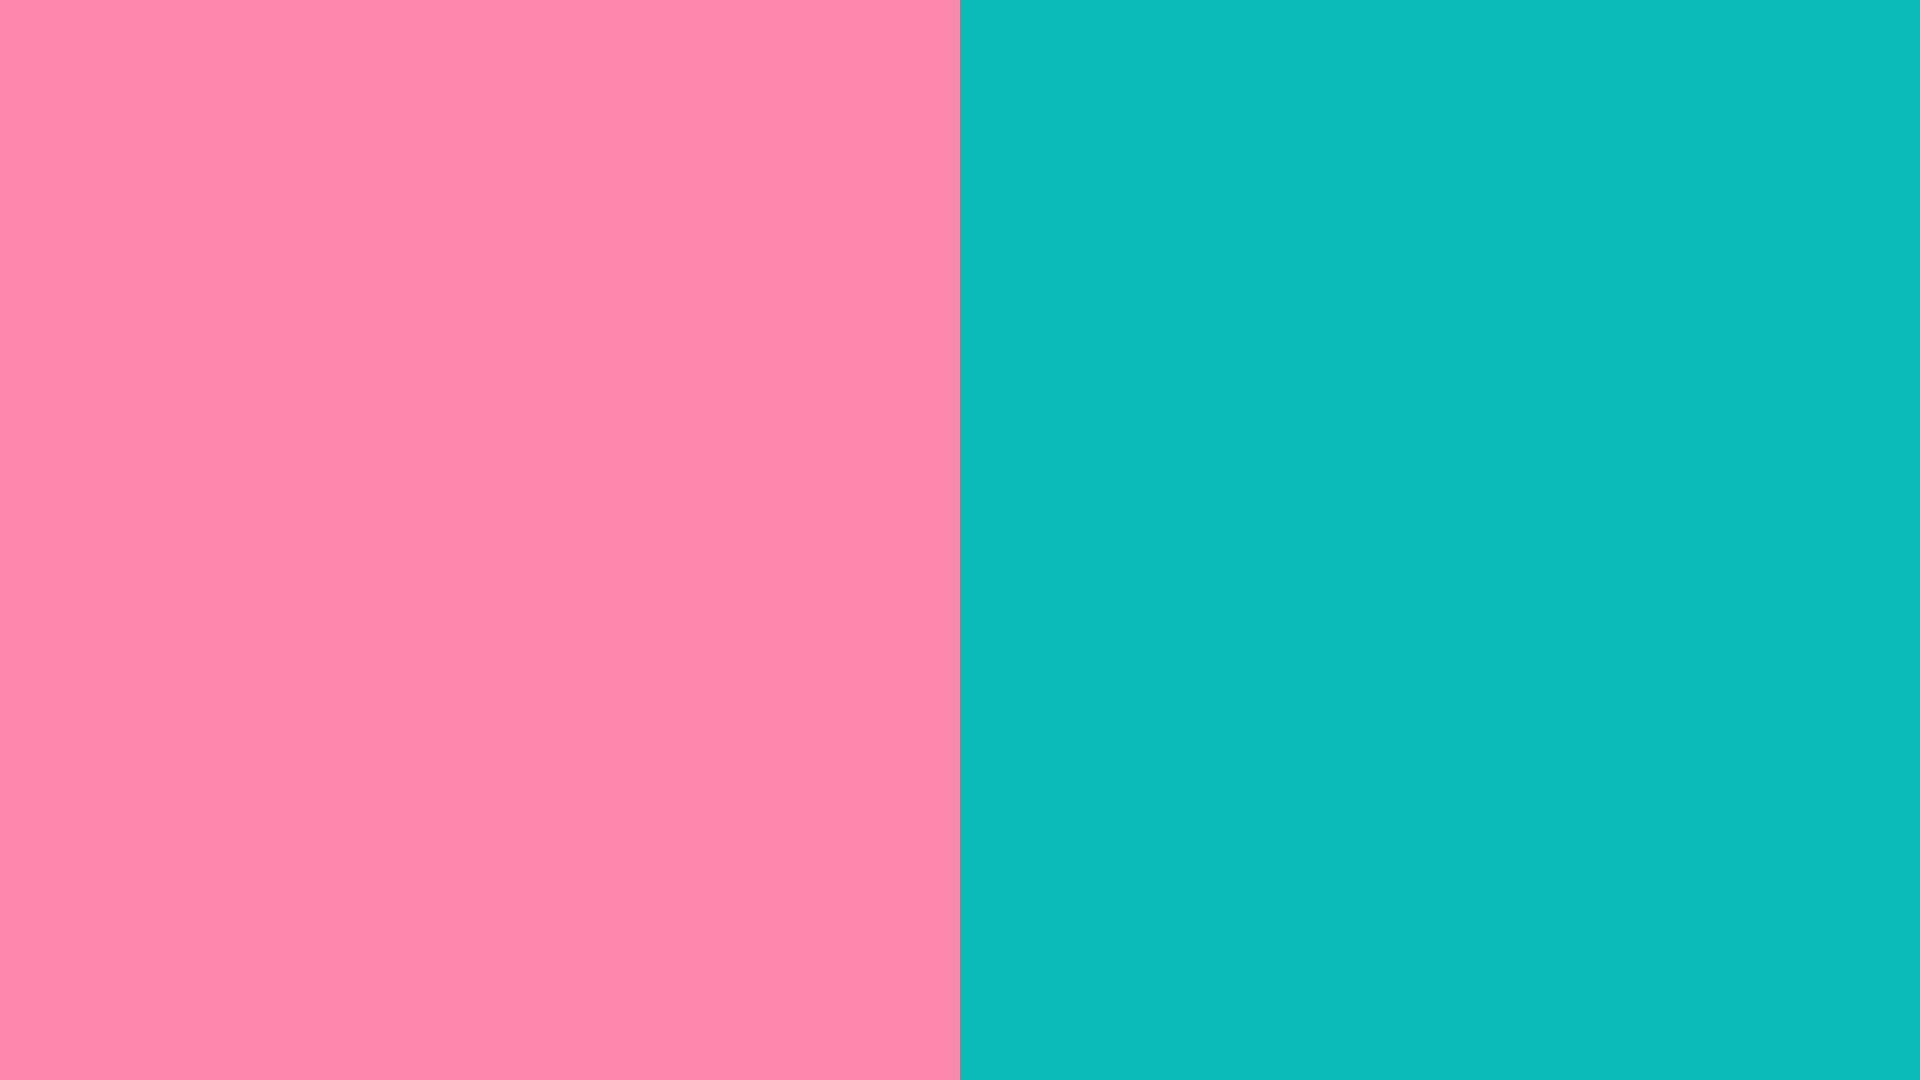 A Pink And Blue Color Palette With Two Different Colors